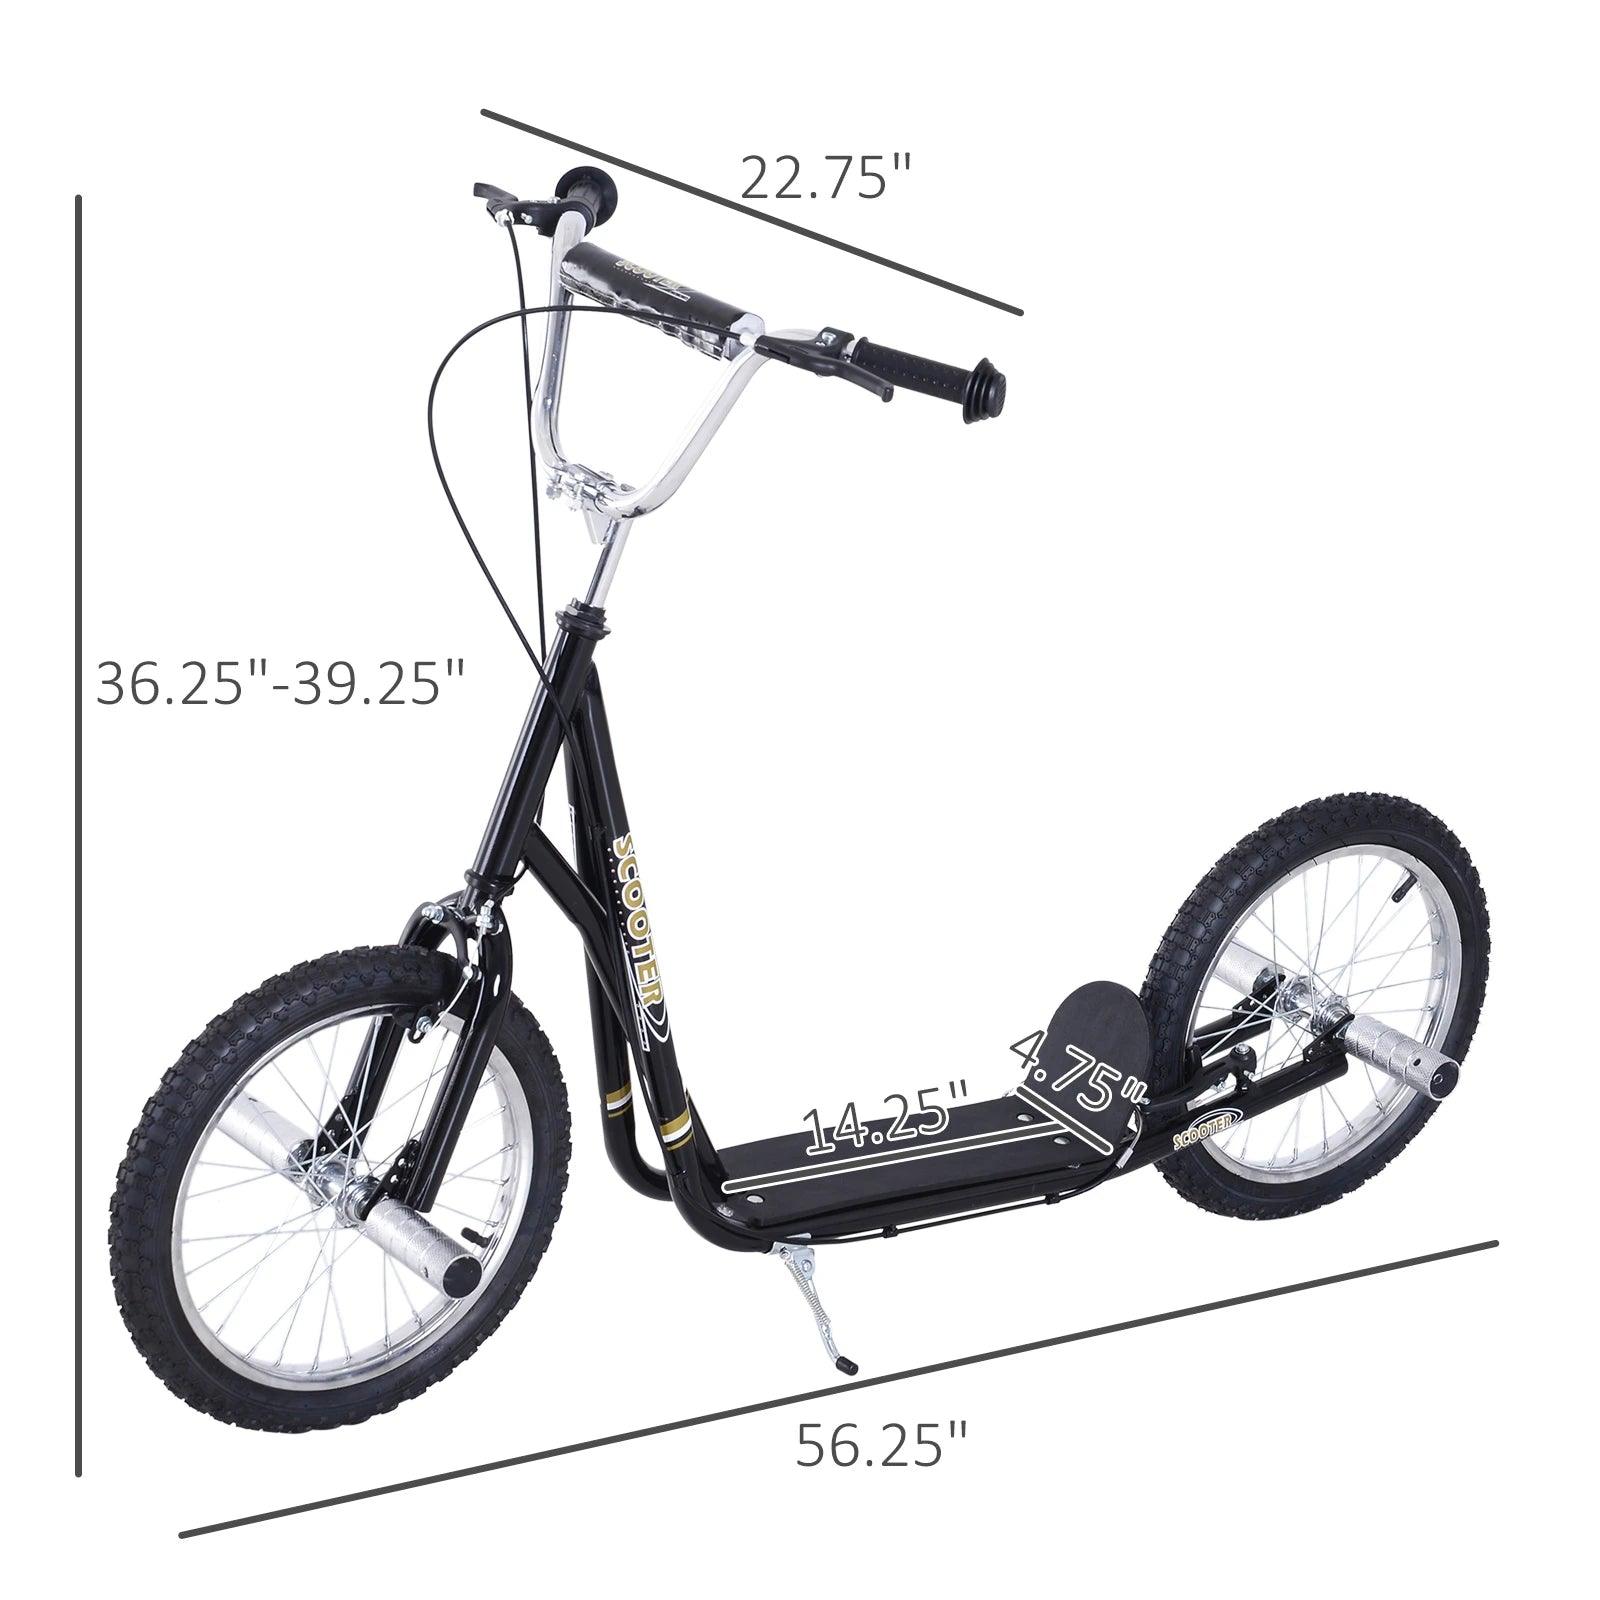 Youth Scooter Teen Kick Scooter Kids Children Stunt Scooter Bike Bicycle Ride On 16